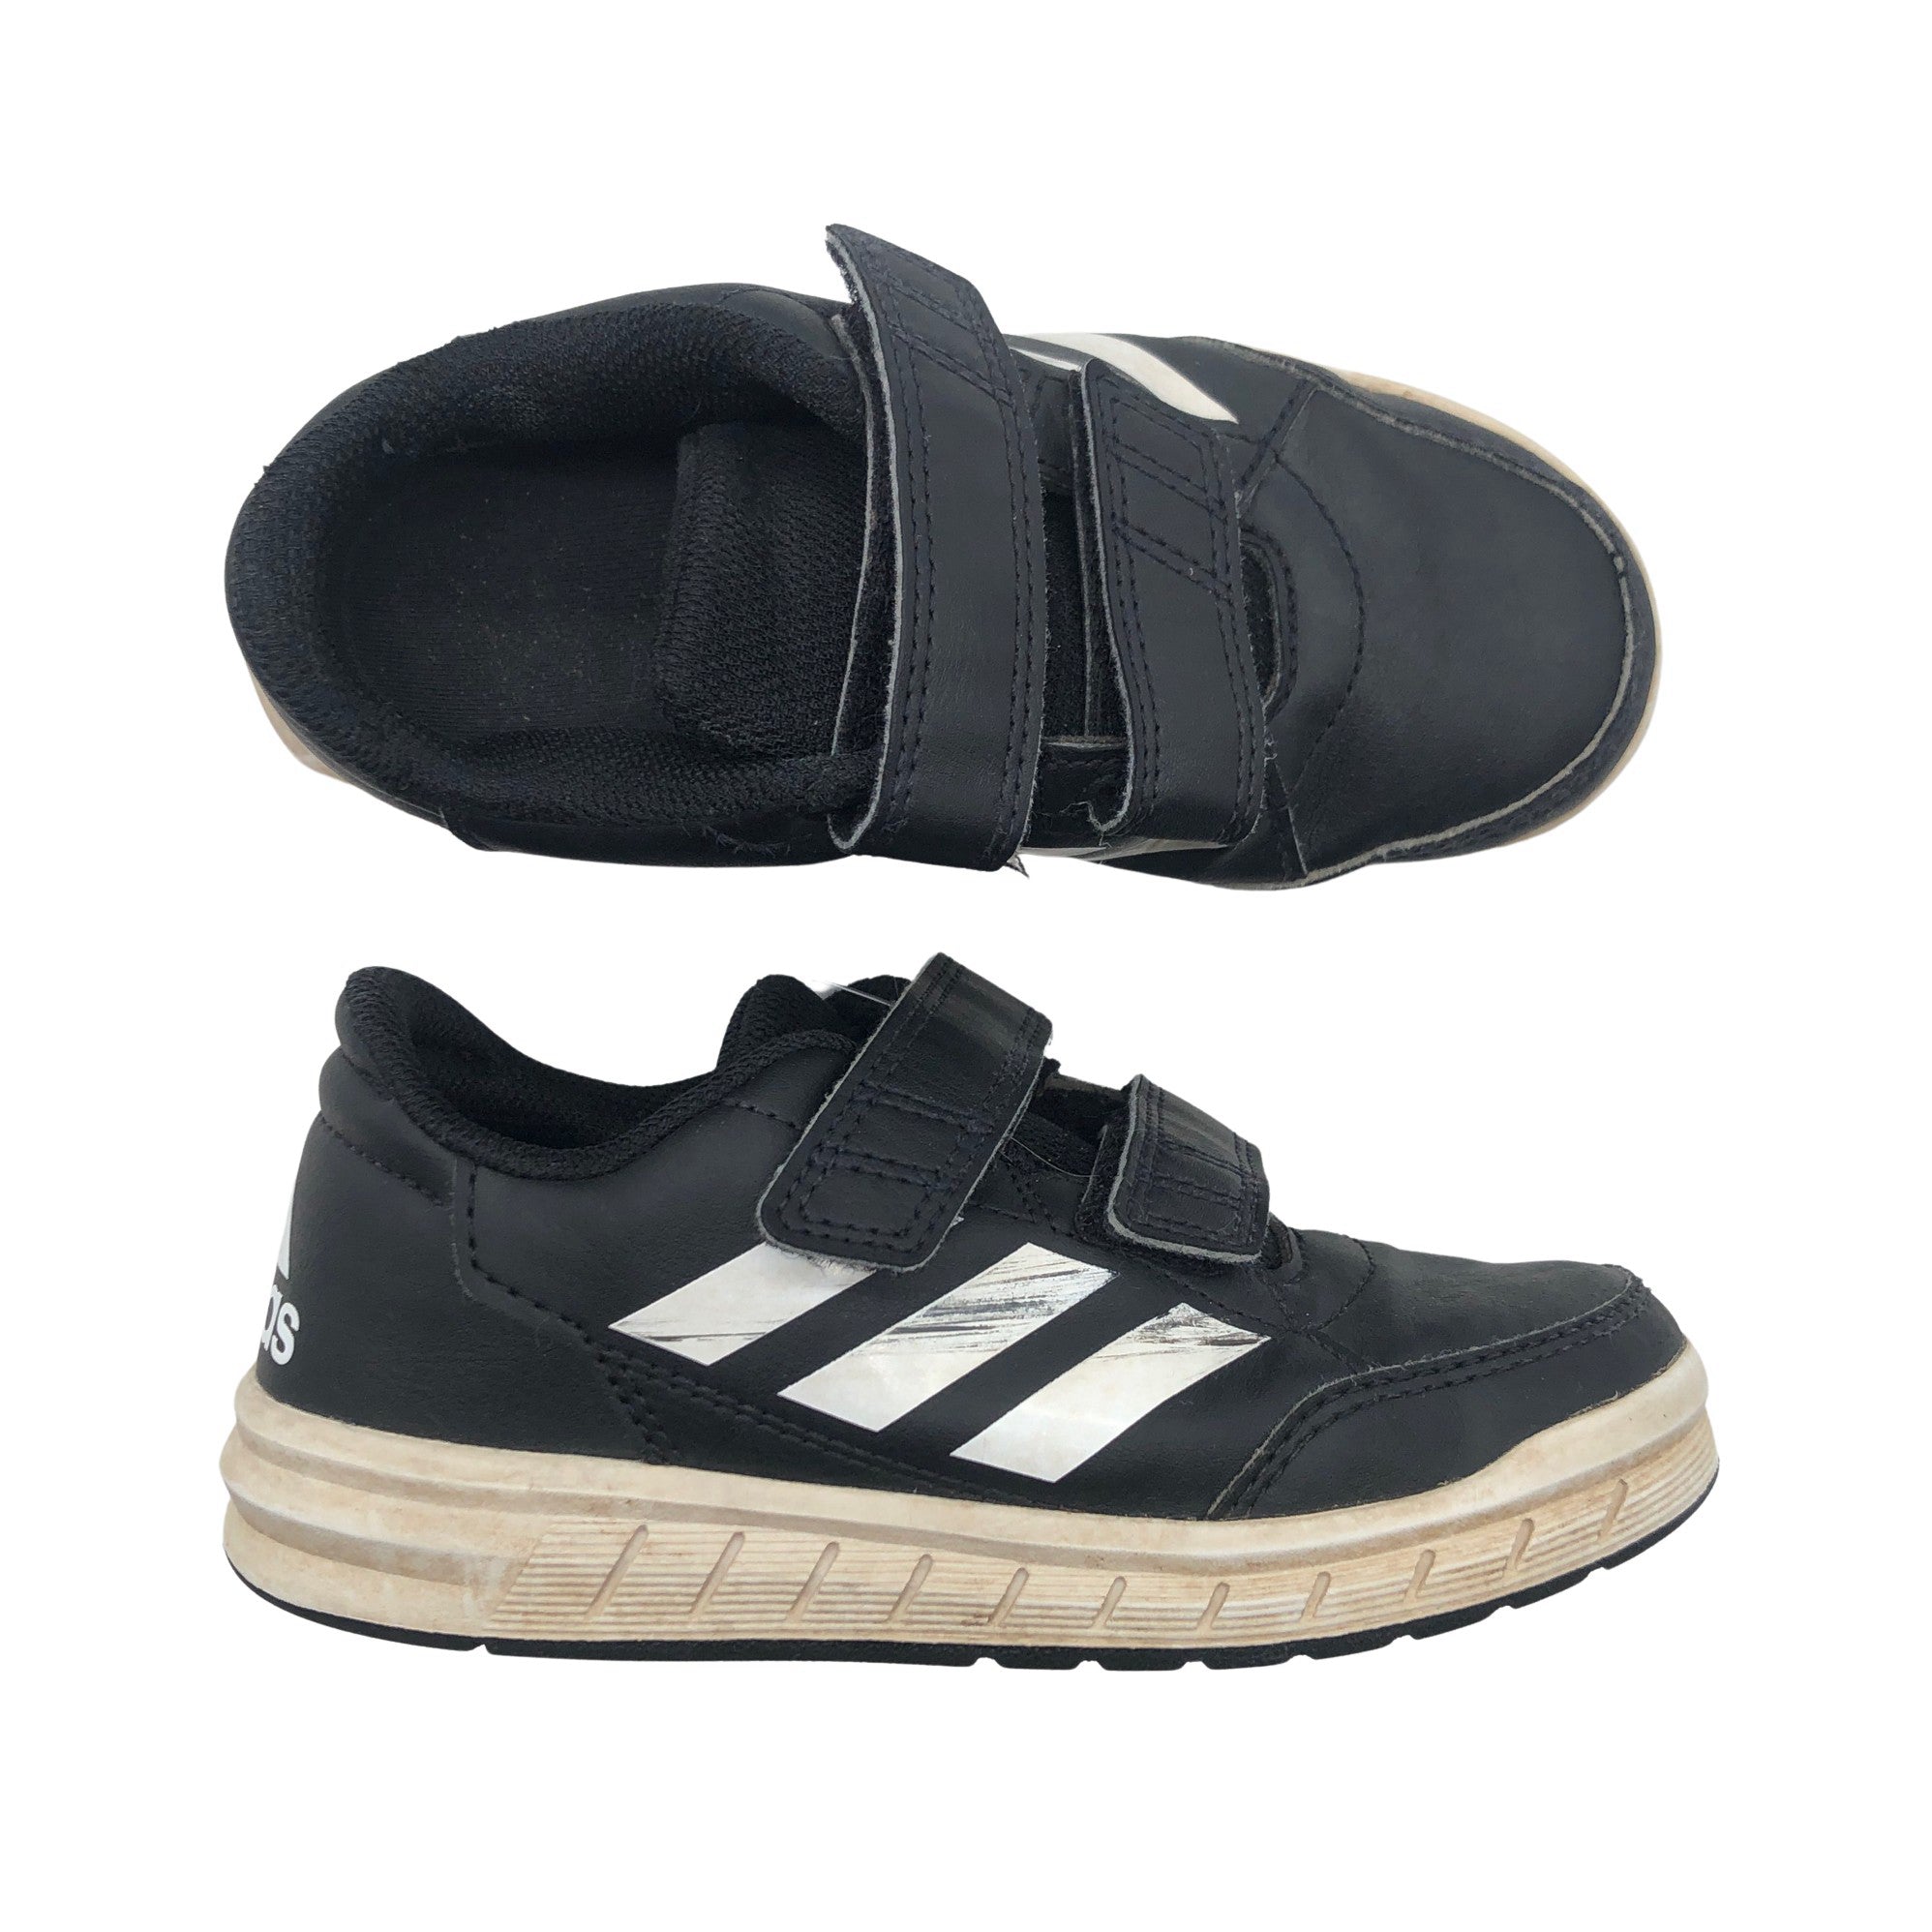 Unisex Adidas Casual sneakers, 28 (Black) Emmy